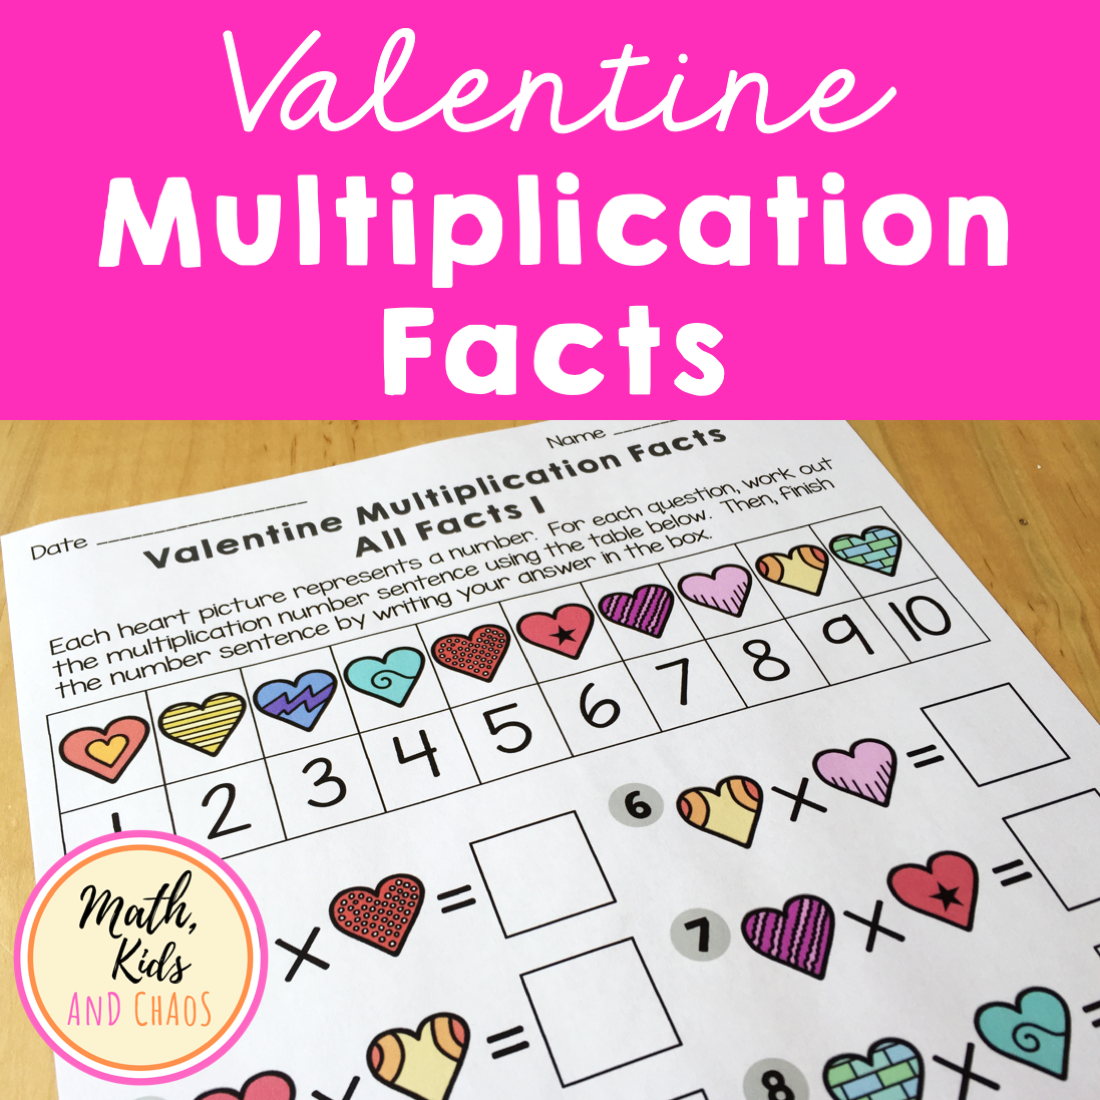 valentine-multiplication-facts-worksheets-math-kids-and-chaos